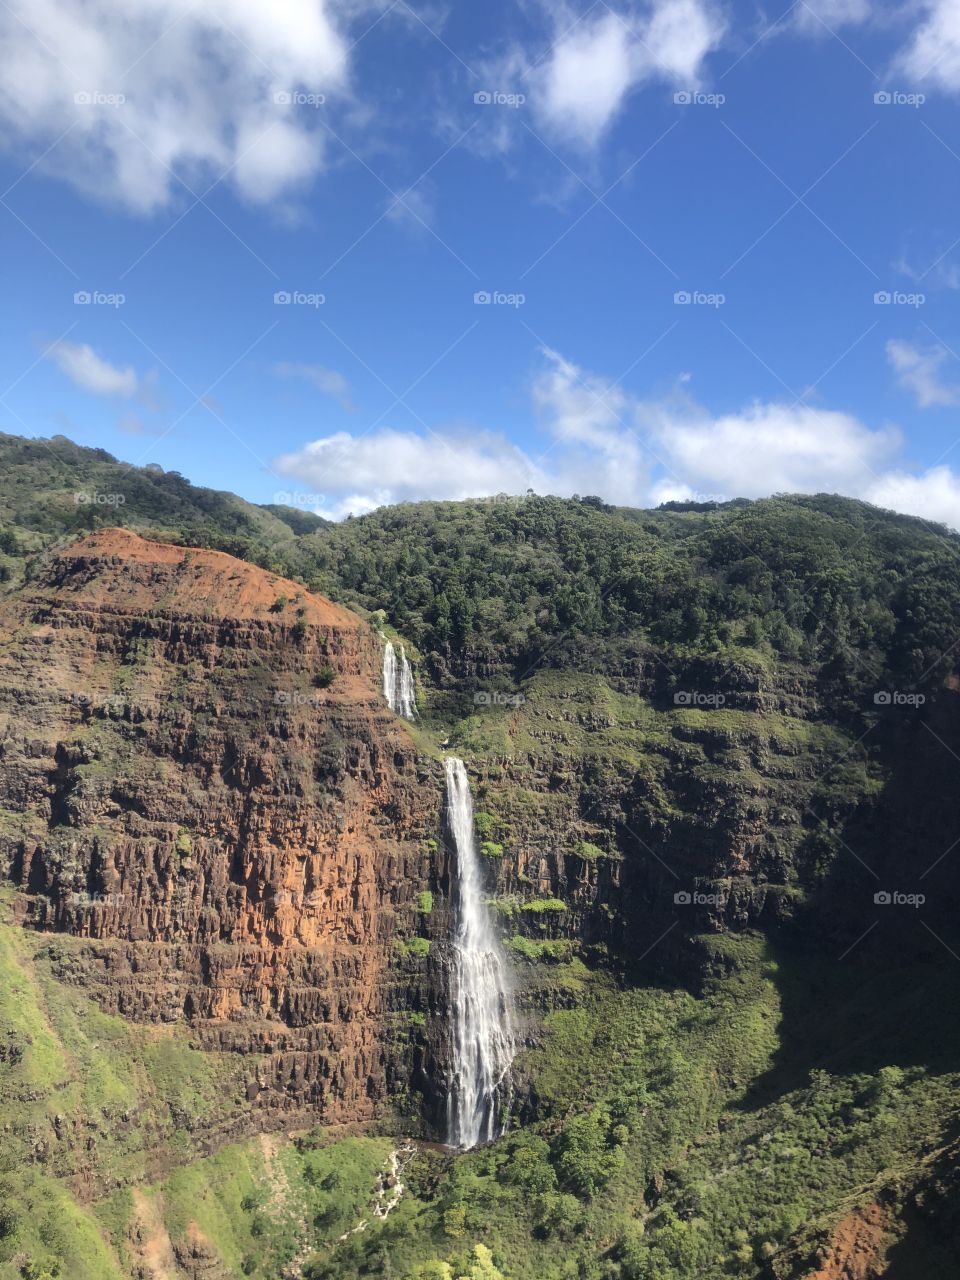 Waterfall View From Helicopter Tour In Kauai, Hawaii